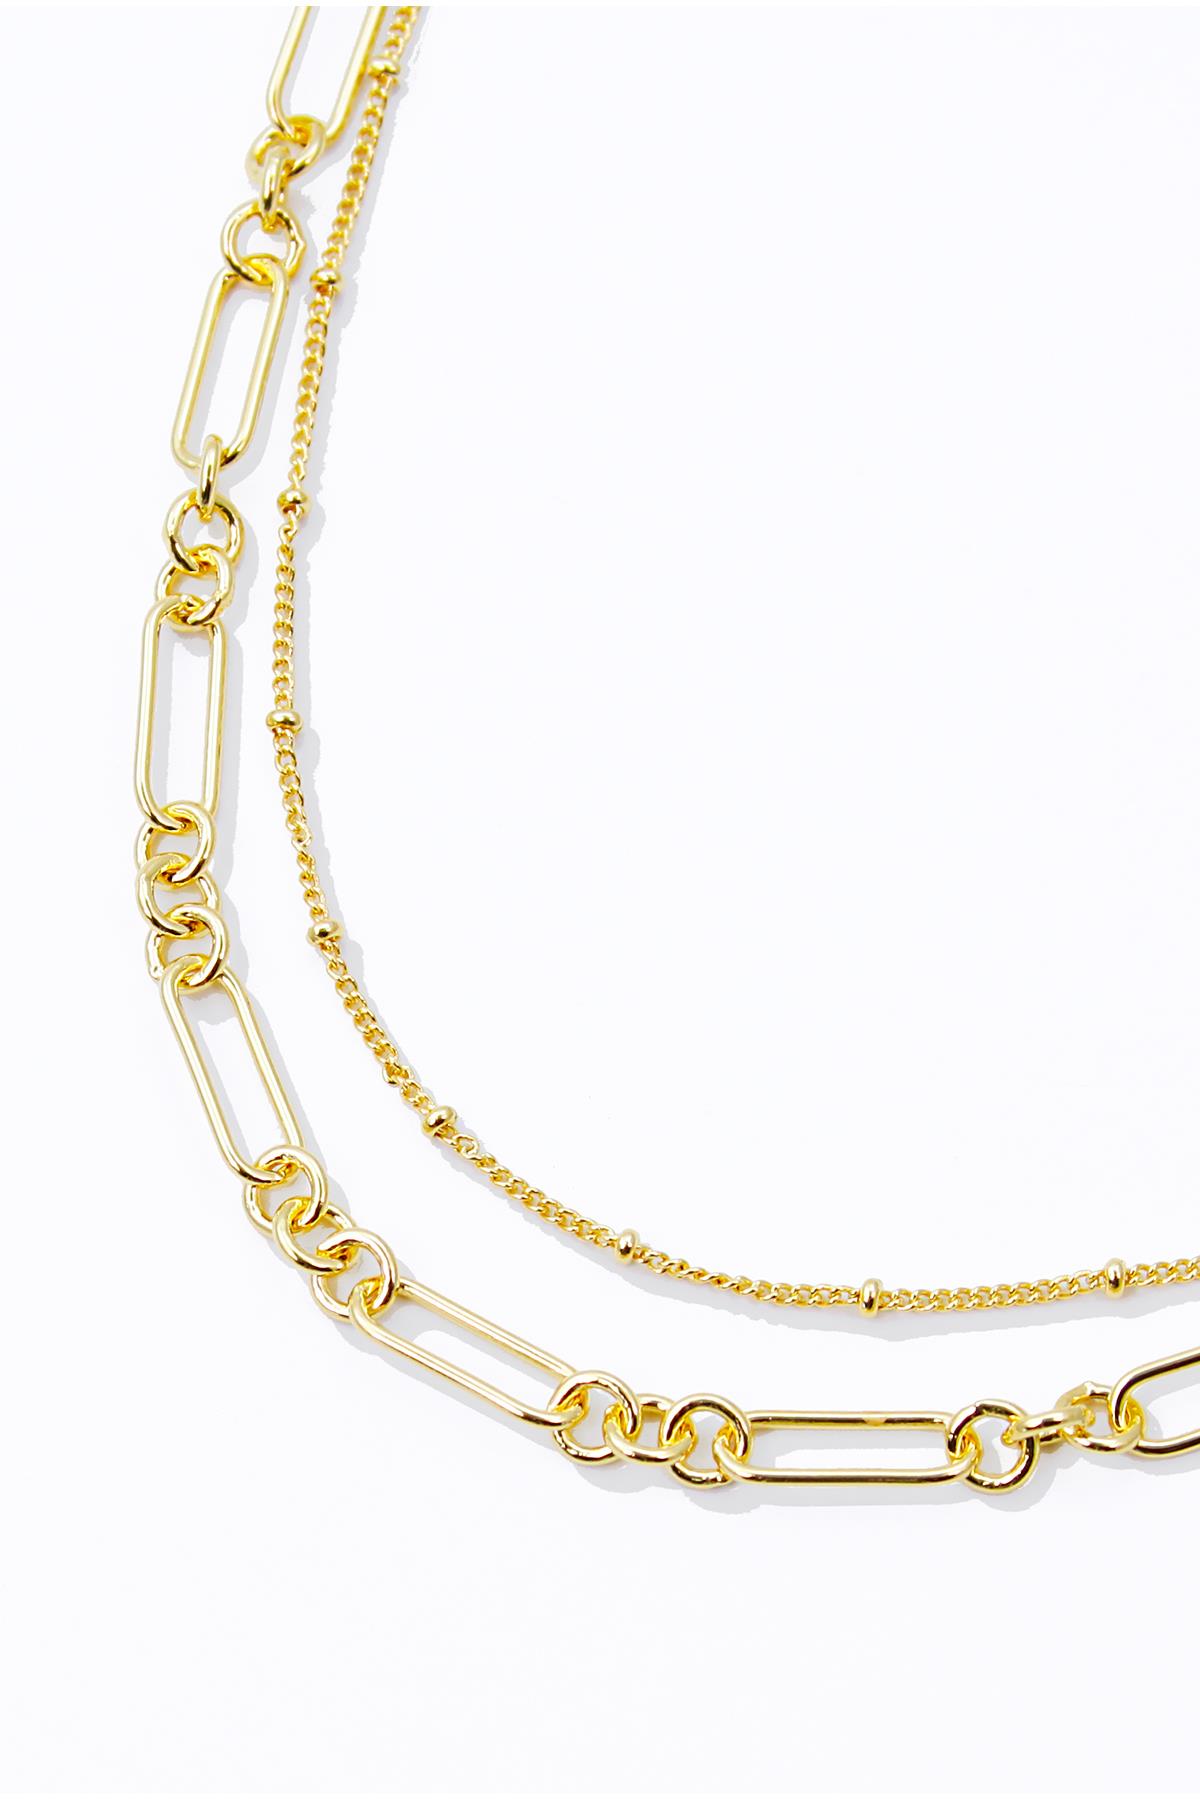 18K GOLD RHODIUM DIPPED MIRACULOUS BEAUTY NECKLACE